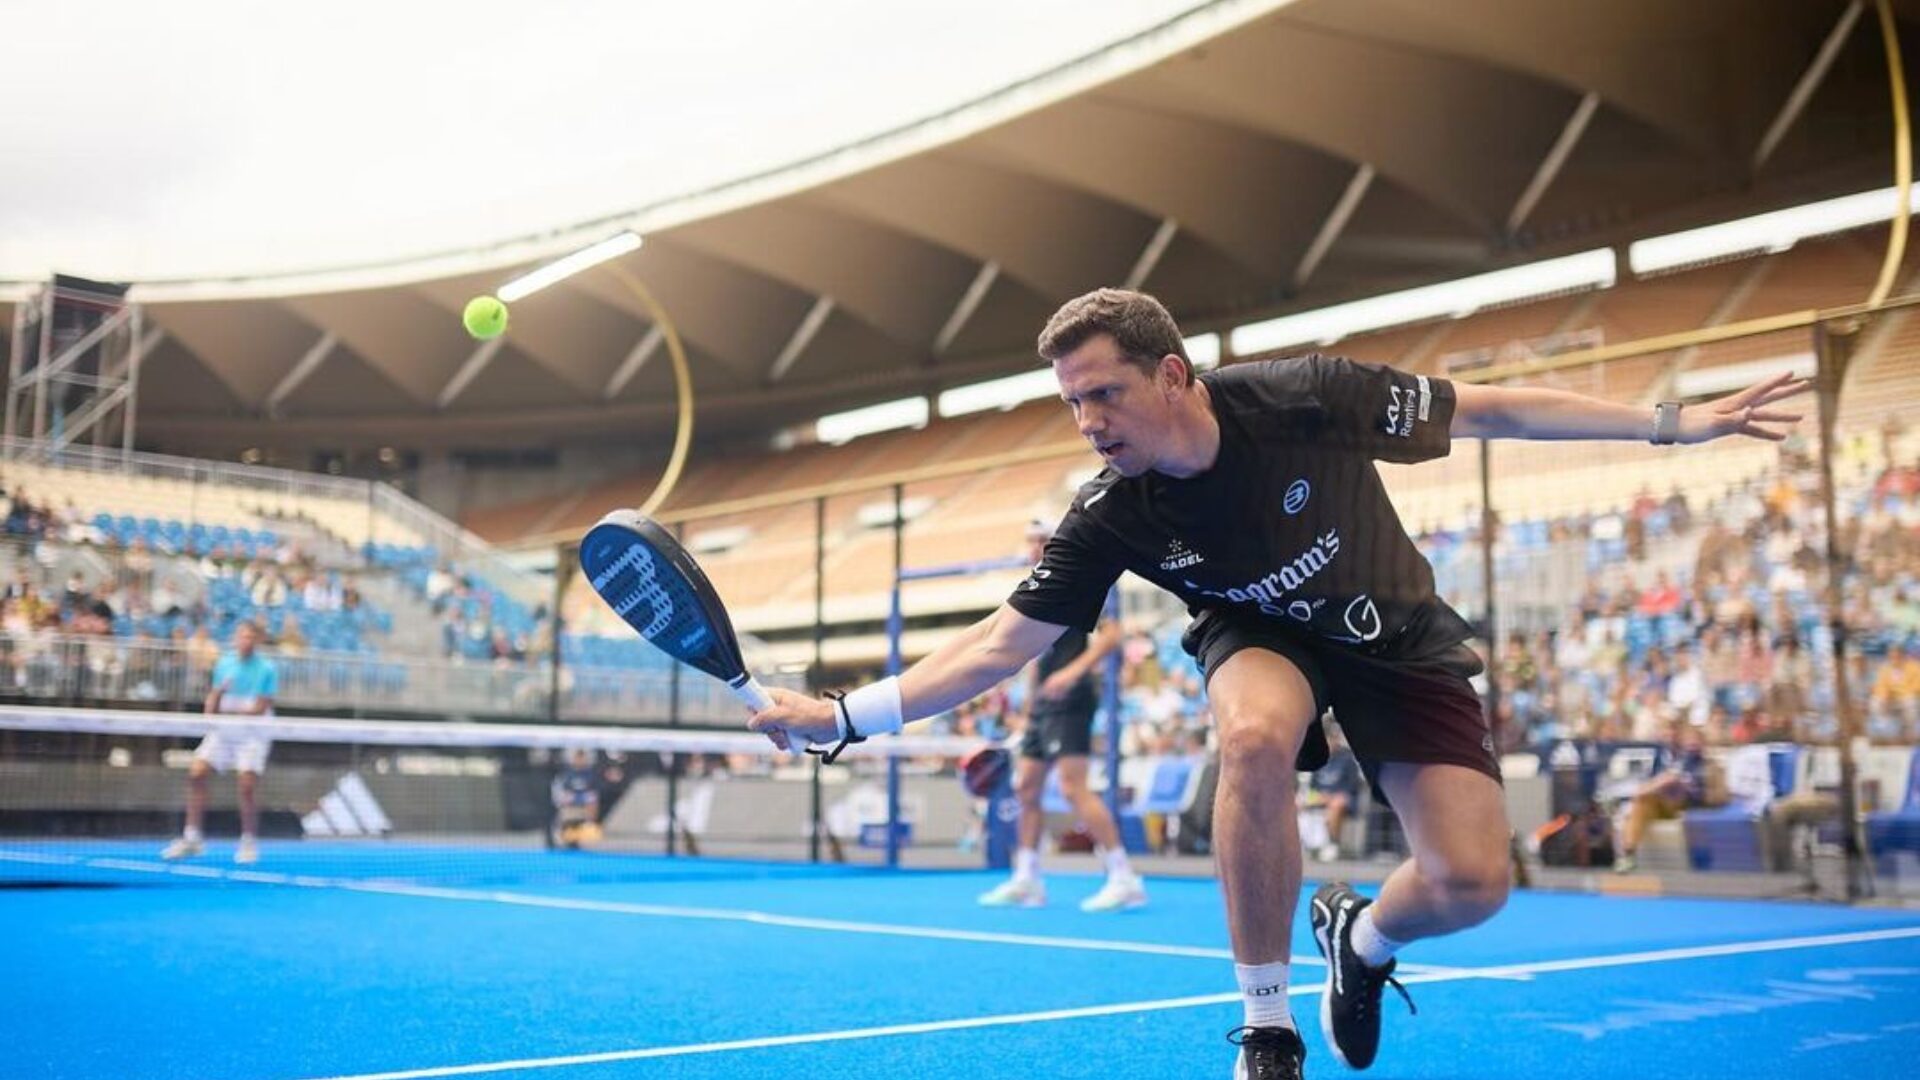 Paquito Navarro: “What I like most about padel, it’s the adrenaline of competition”